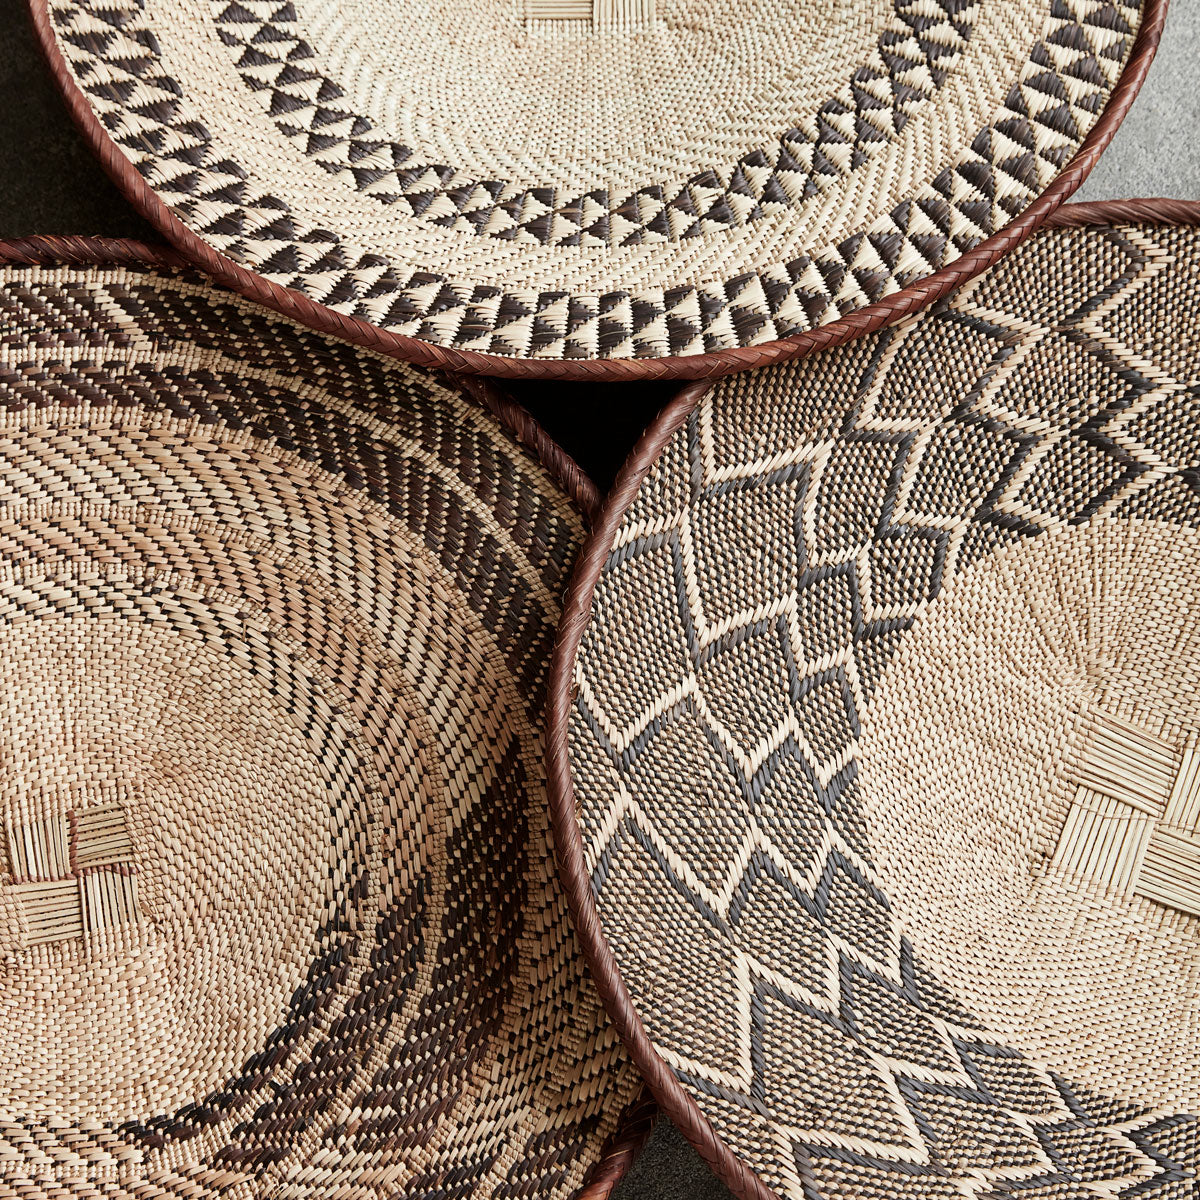 Baskets, Tonga house doctor baskets for storage or wall decoration